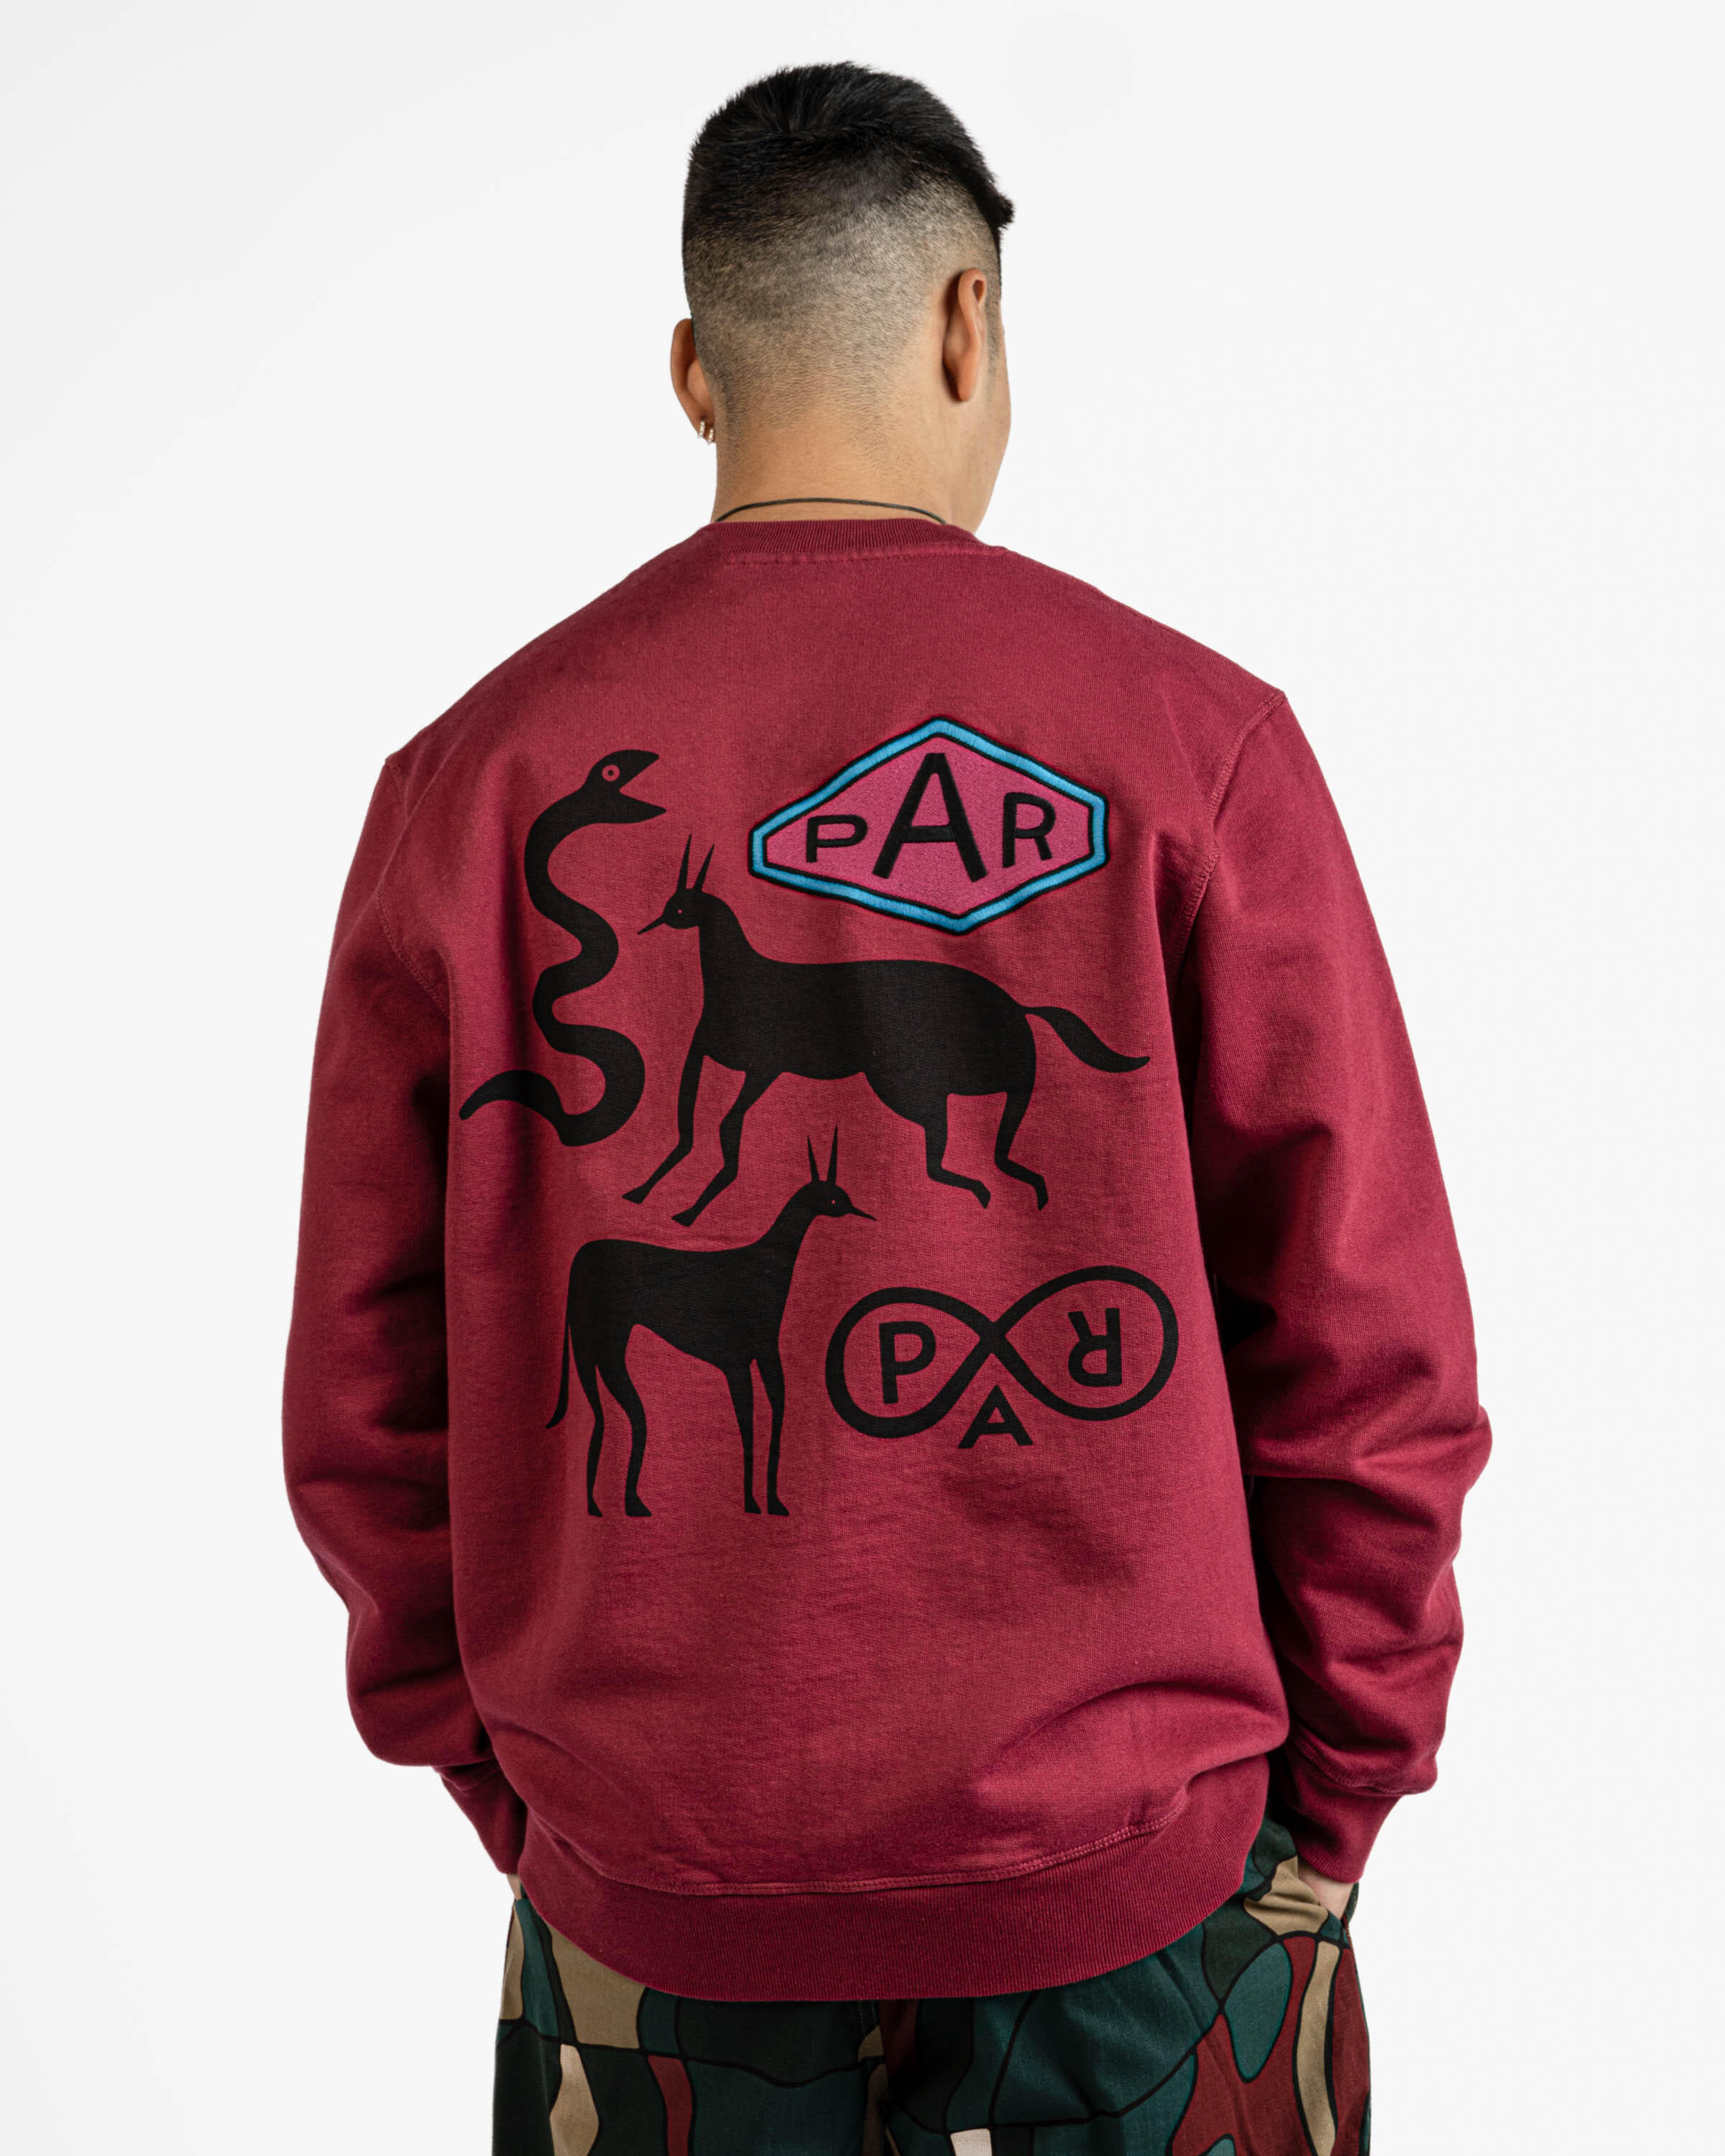 by Parra snaked by a horse crew neck sweatshirt